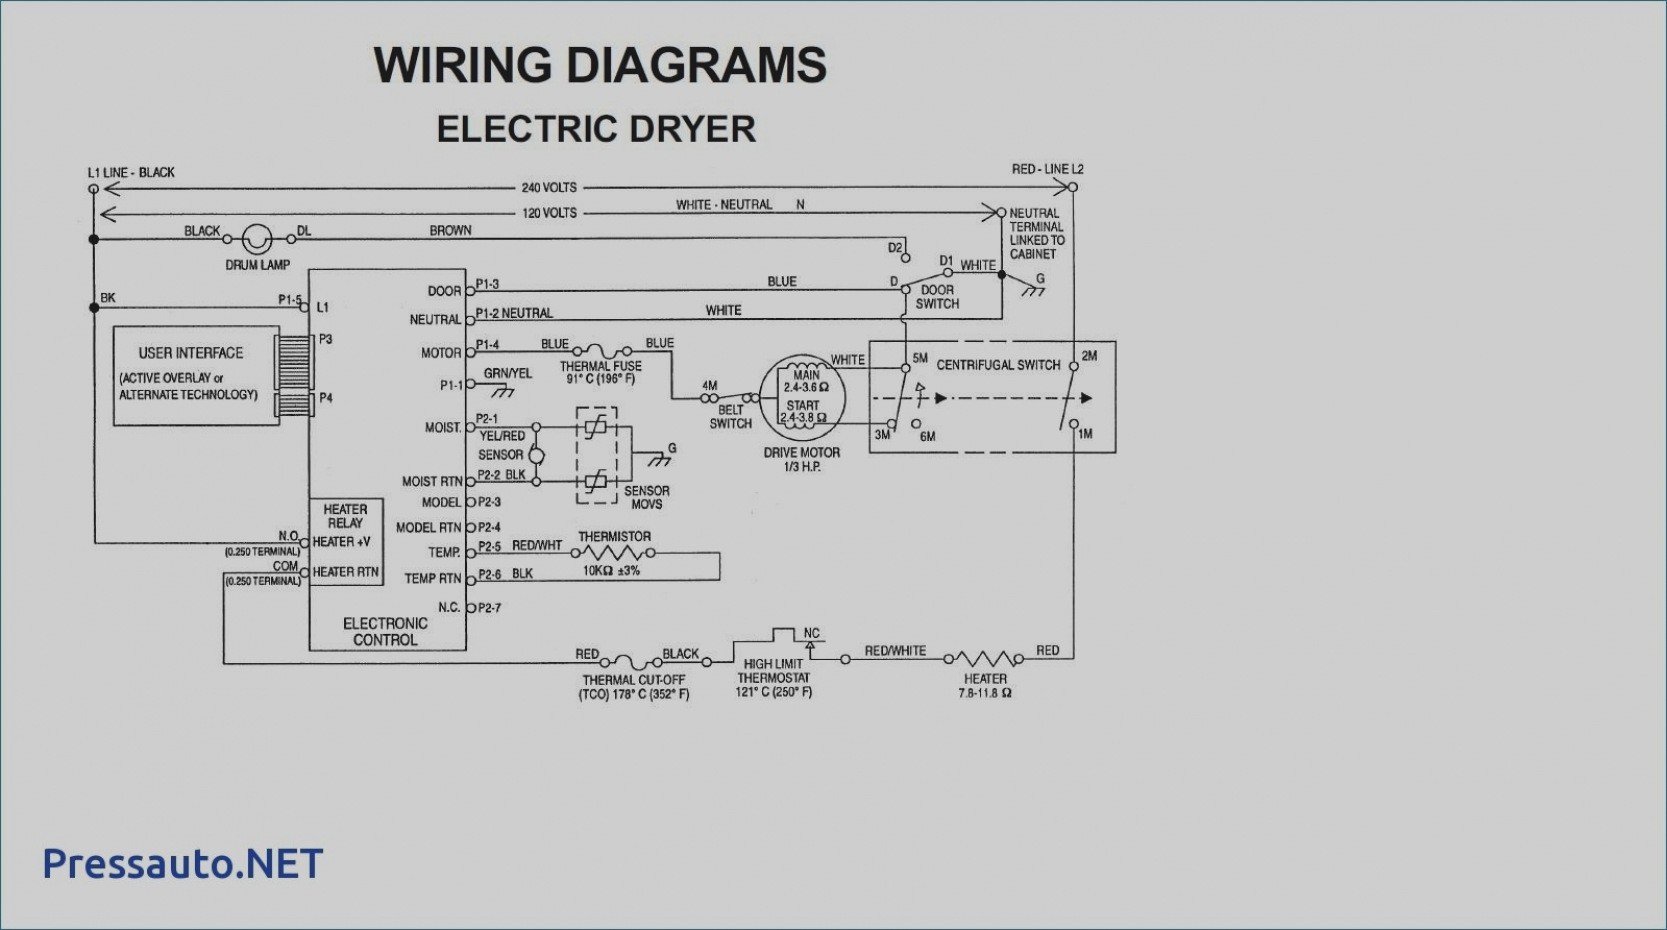 Trend Whirlpool Dryer Wiring Diagram Troubleshoot Image Collections Free For Estate